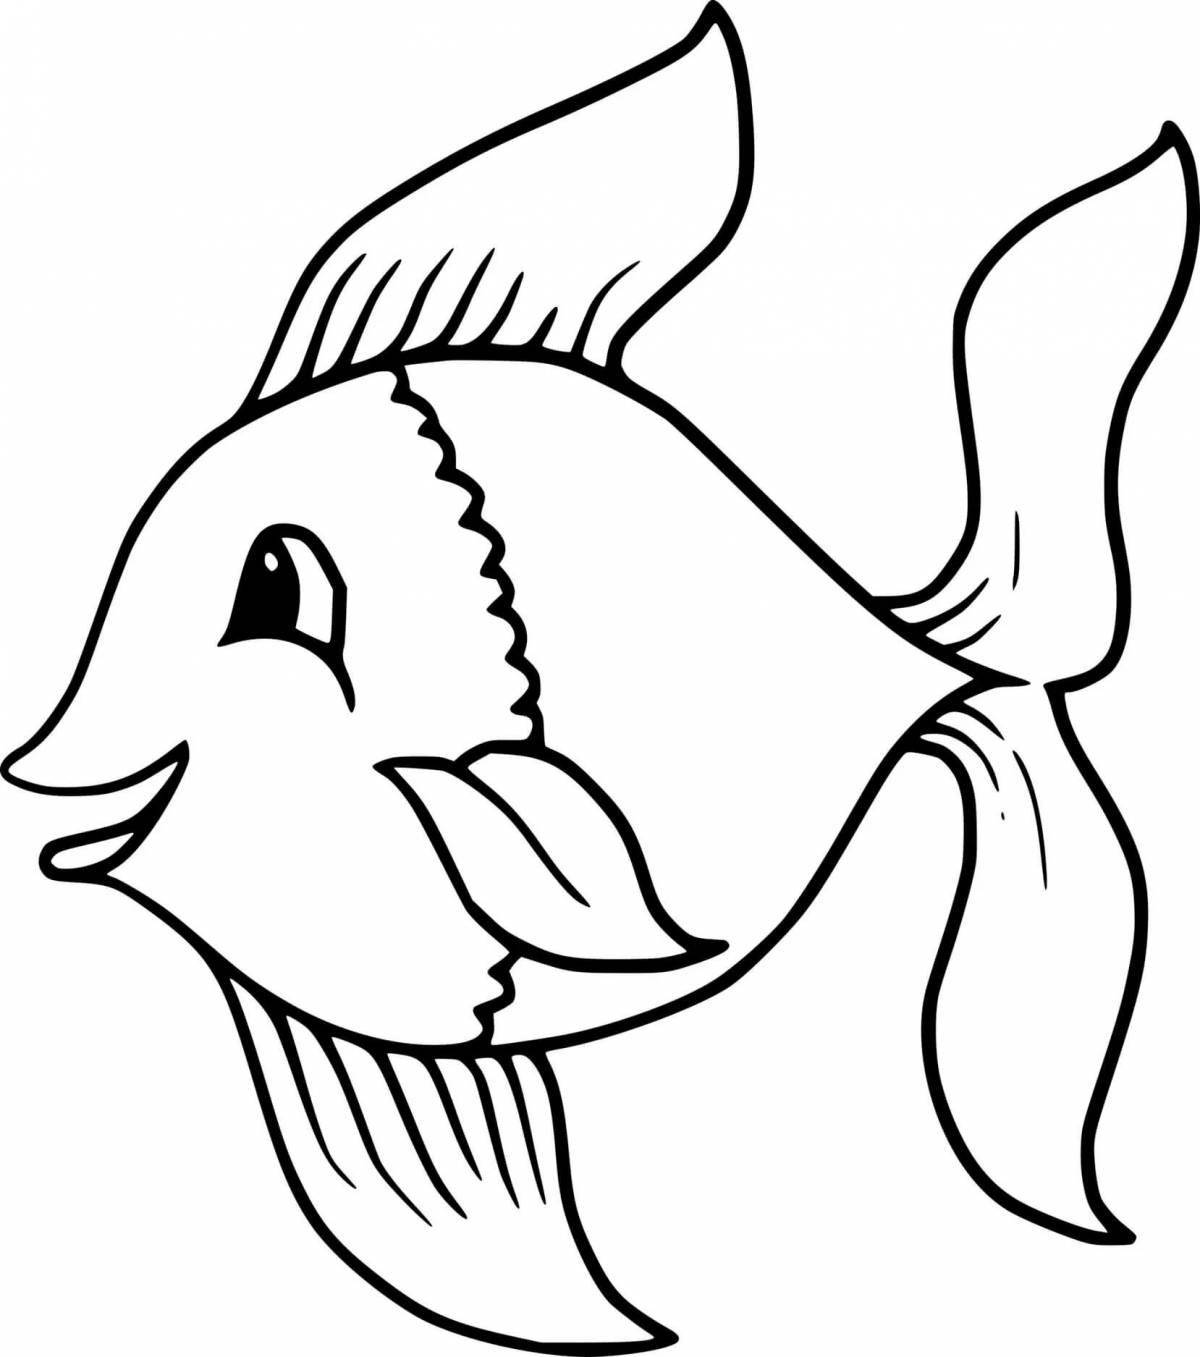 Sweet fish coloring page